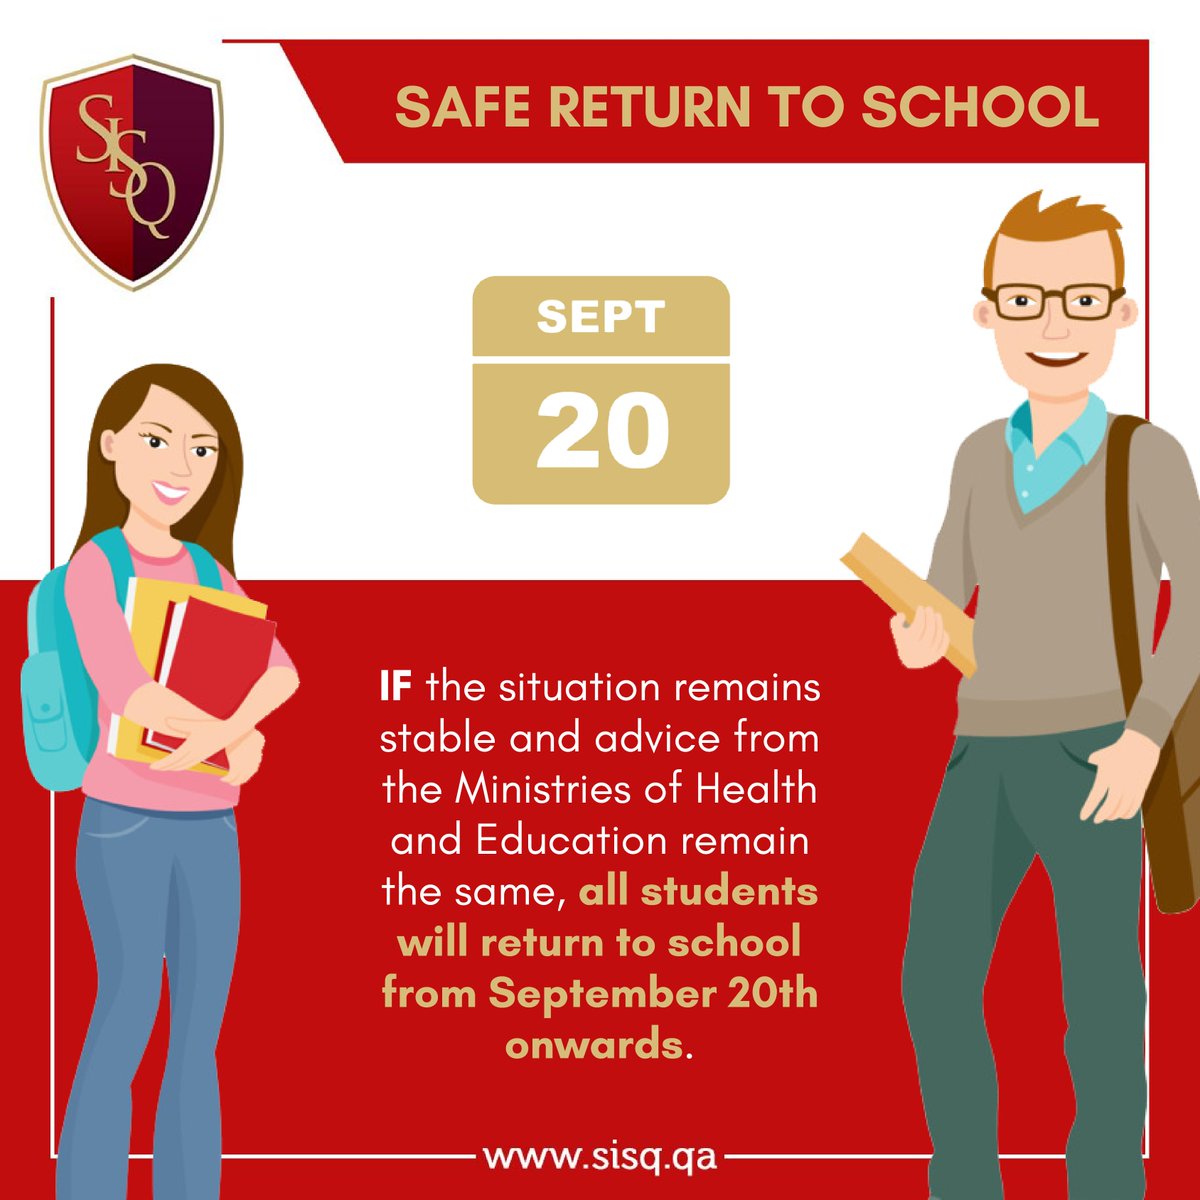 Know more about what SISQ is doing to ensure safety as we welcome the new academic year. #SafeReturnToSchool #ExperienceSISQ #LearningNeverStops